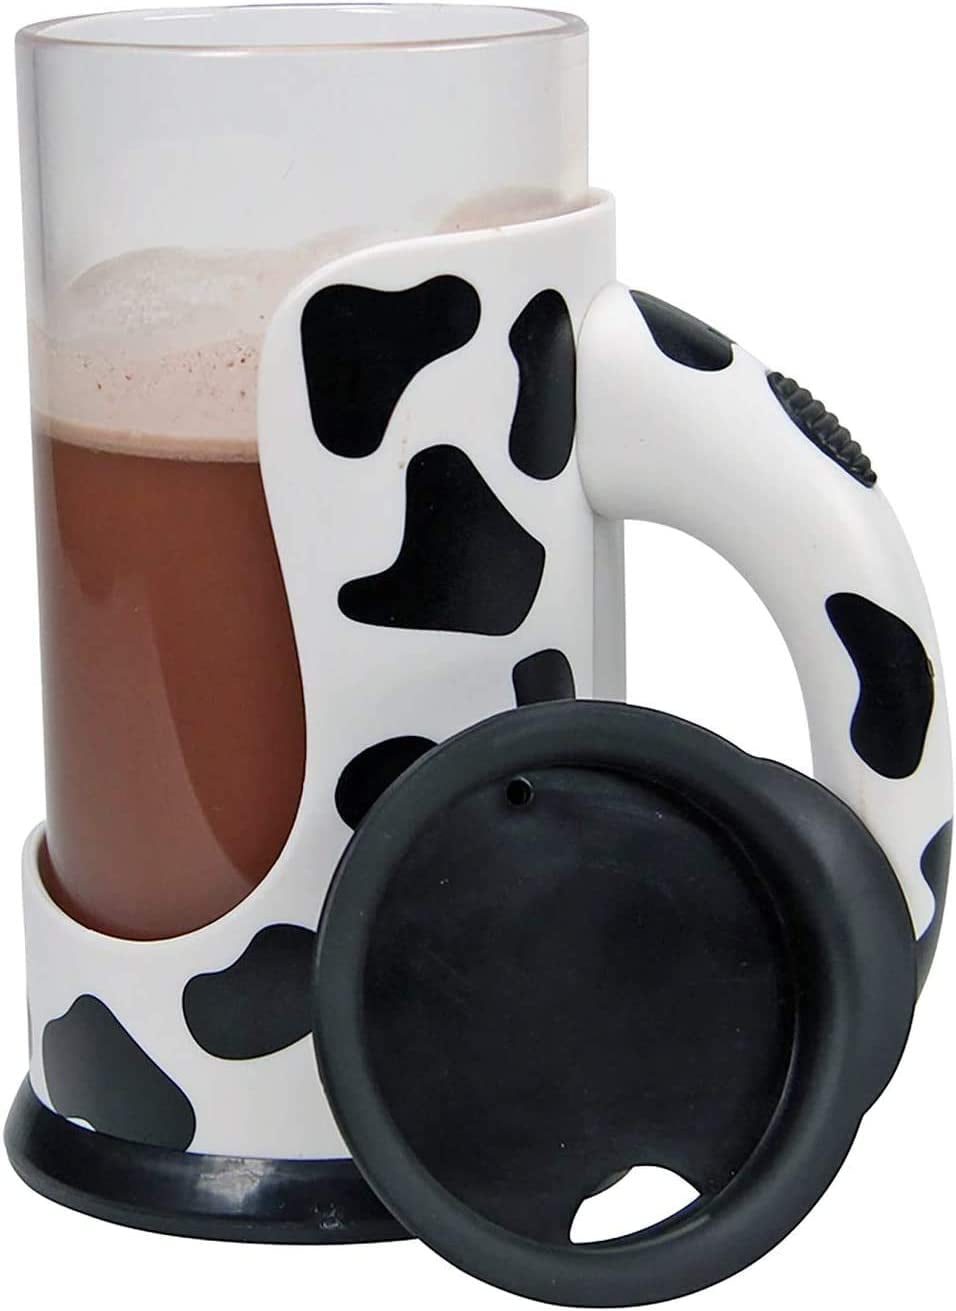 Vat19 on X: Mix milk with the Moo Mixer Supreme, a sweet mug with an  integrated battery-powered mixer.    / X